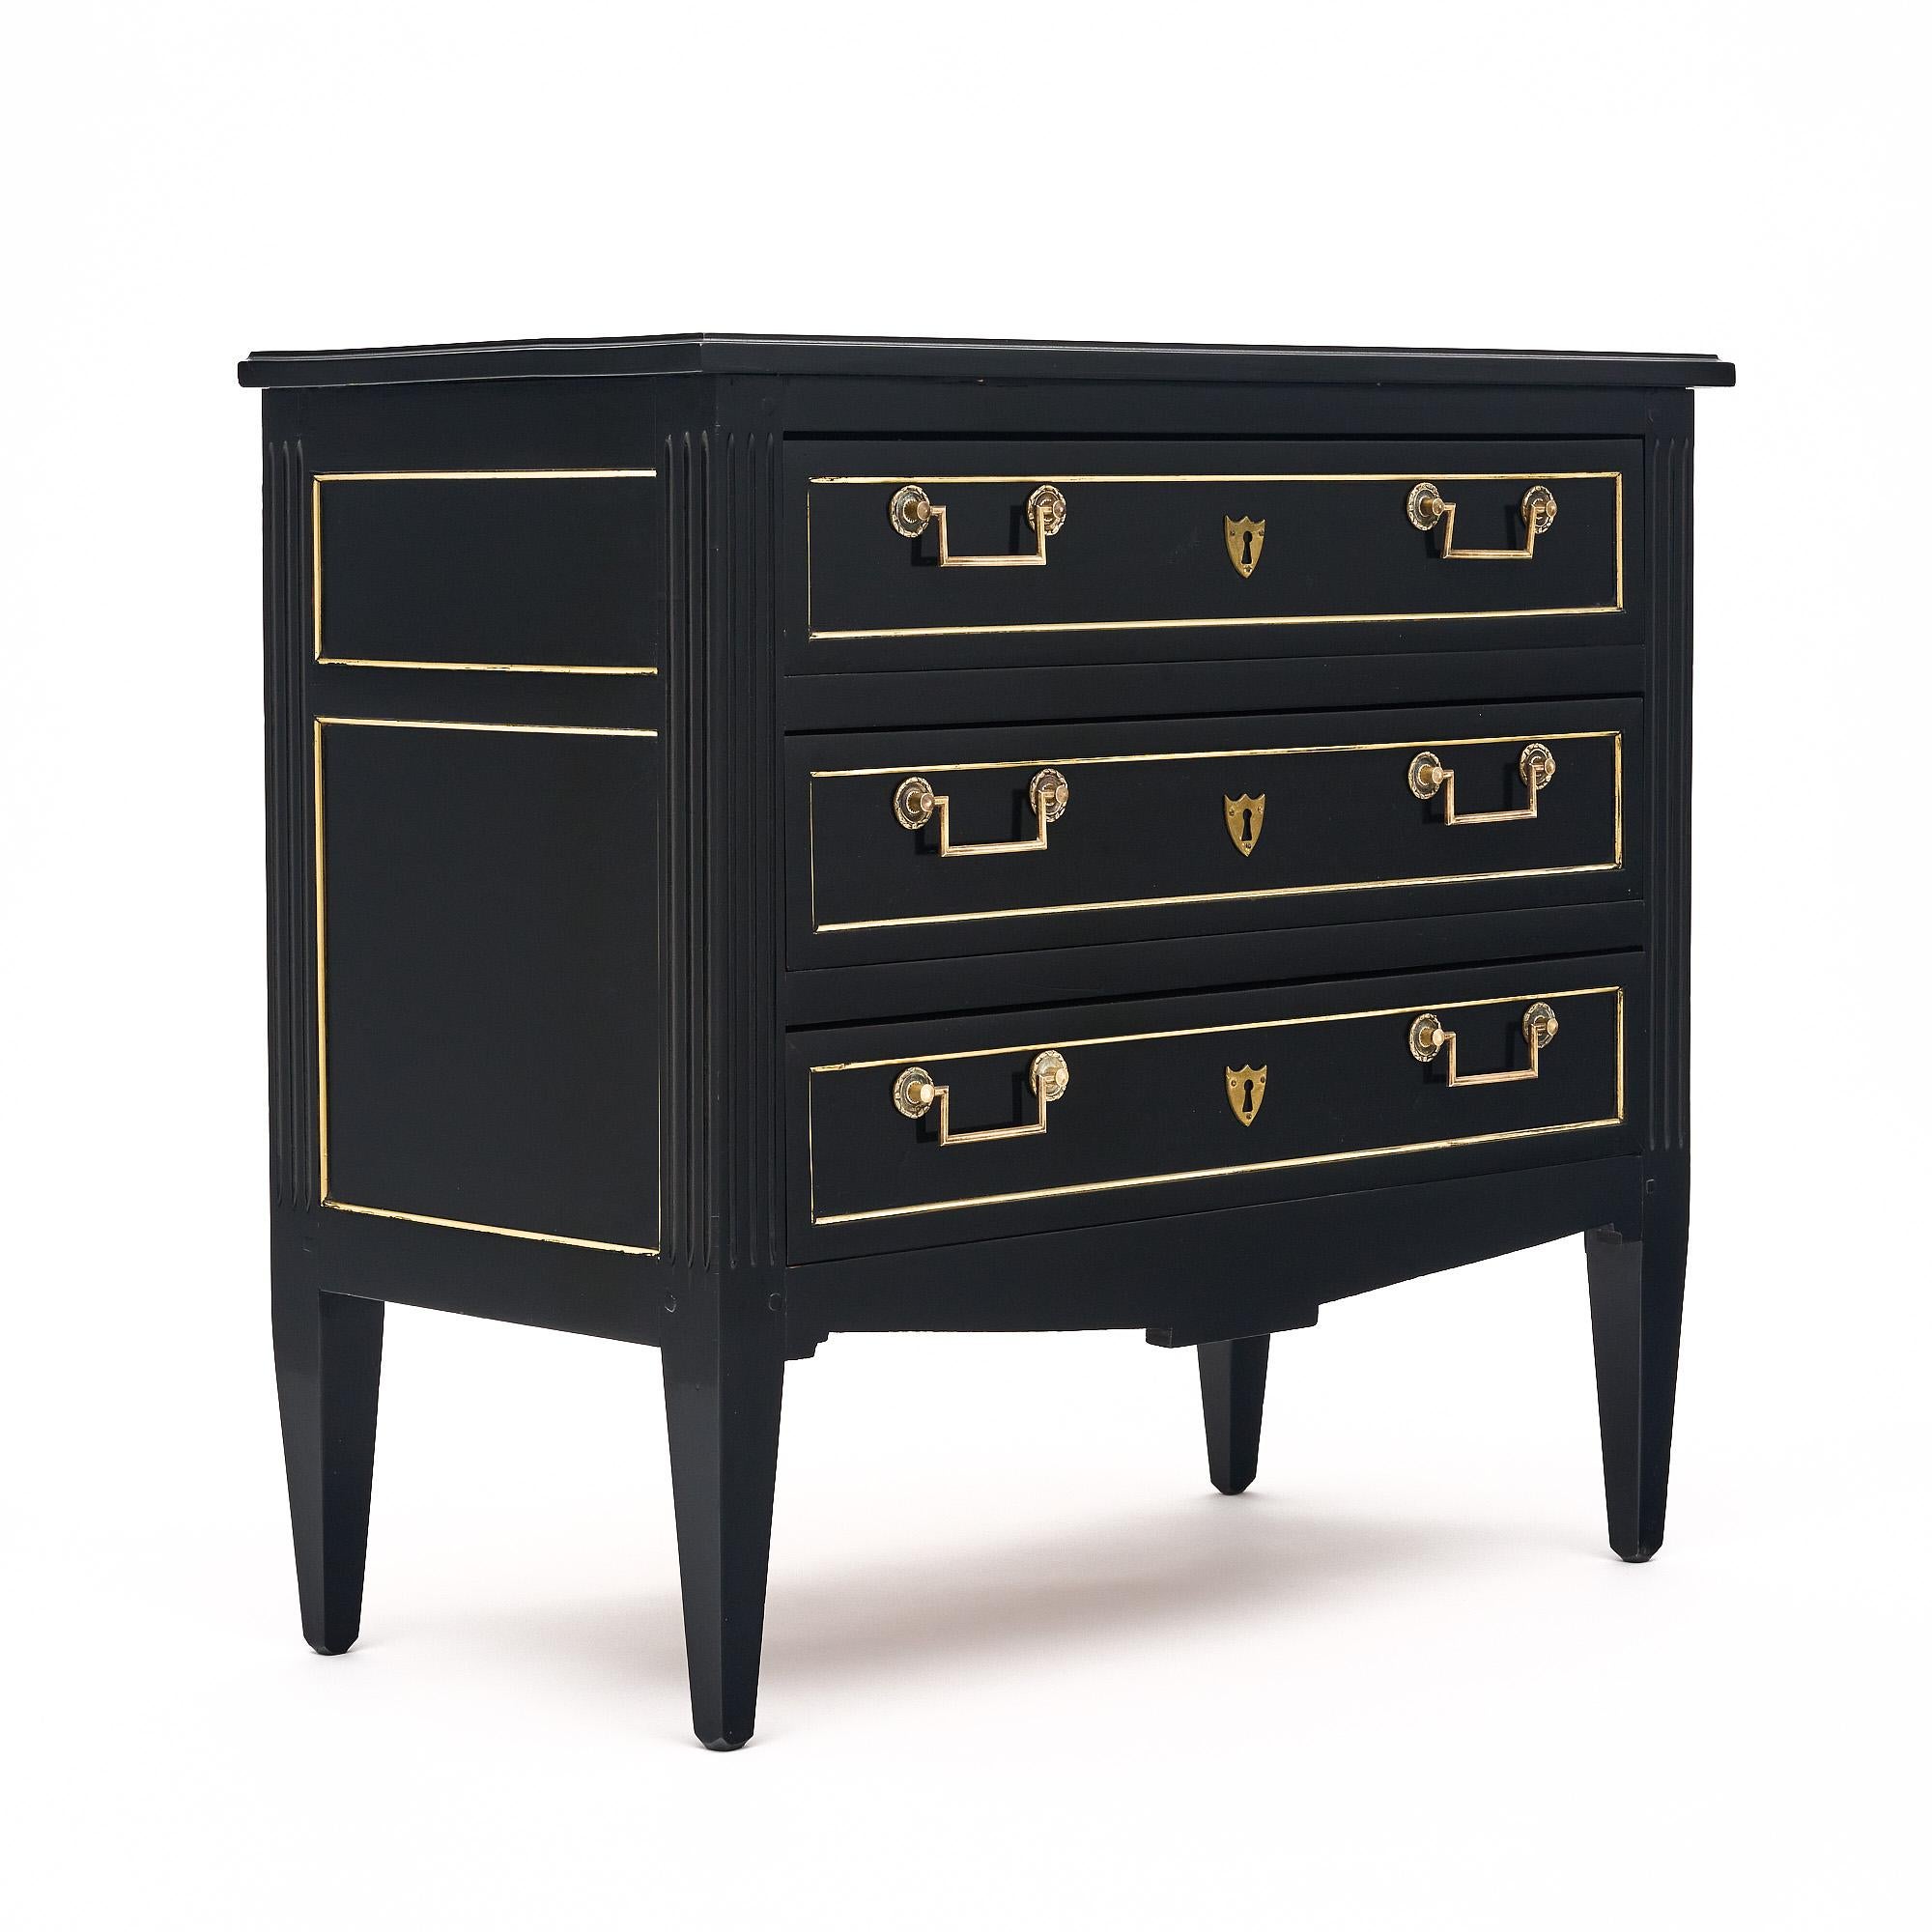 Chest of drawers, French, in the Louis XVI style made of mahogany. This piece has three dovetailed drawers, gilt brass pulls and trim throughout. The petite commode boasts a lustrous Museum quality ebonized French polish.
